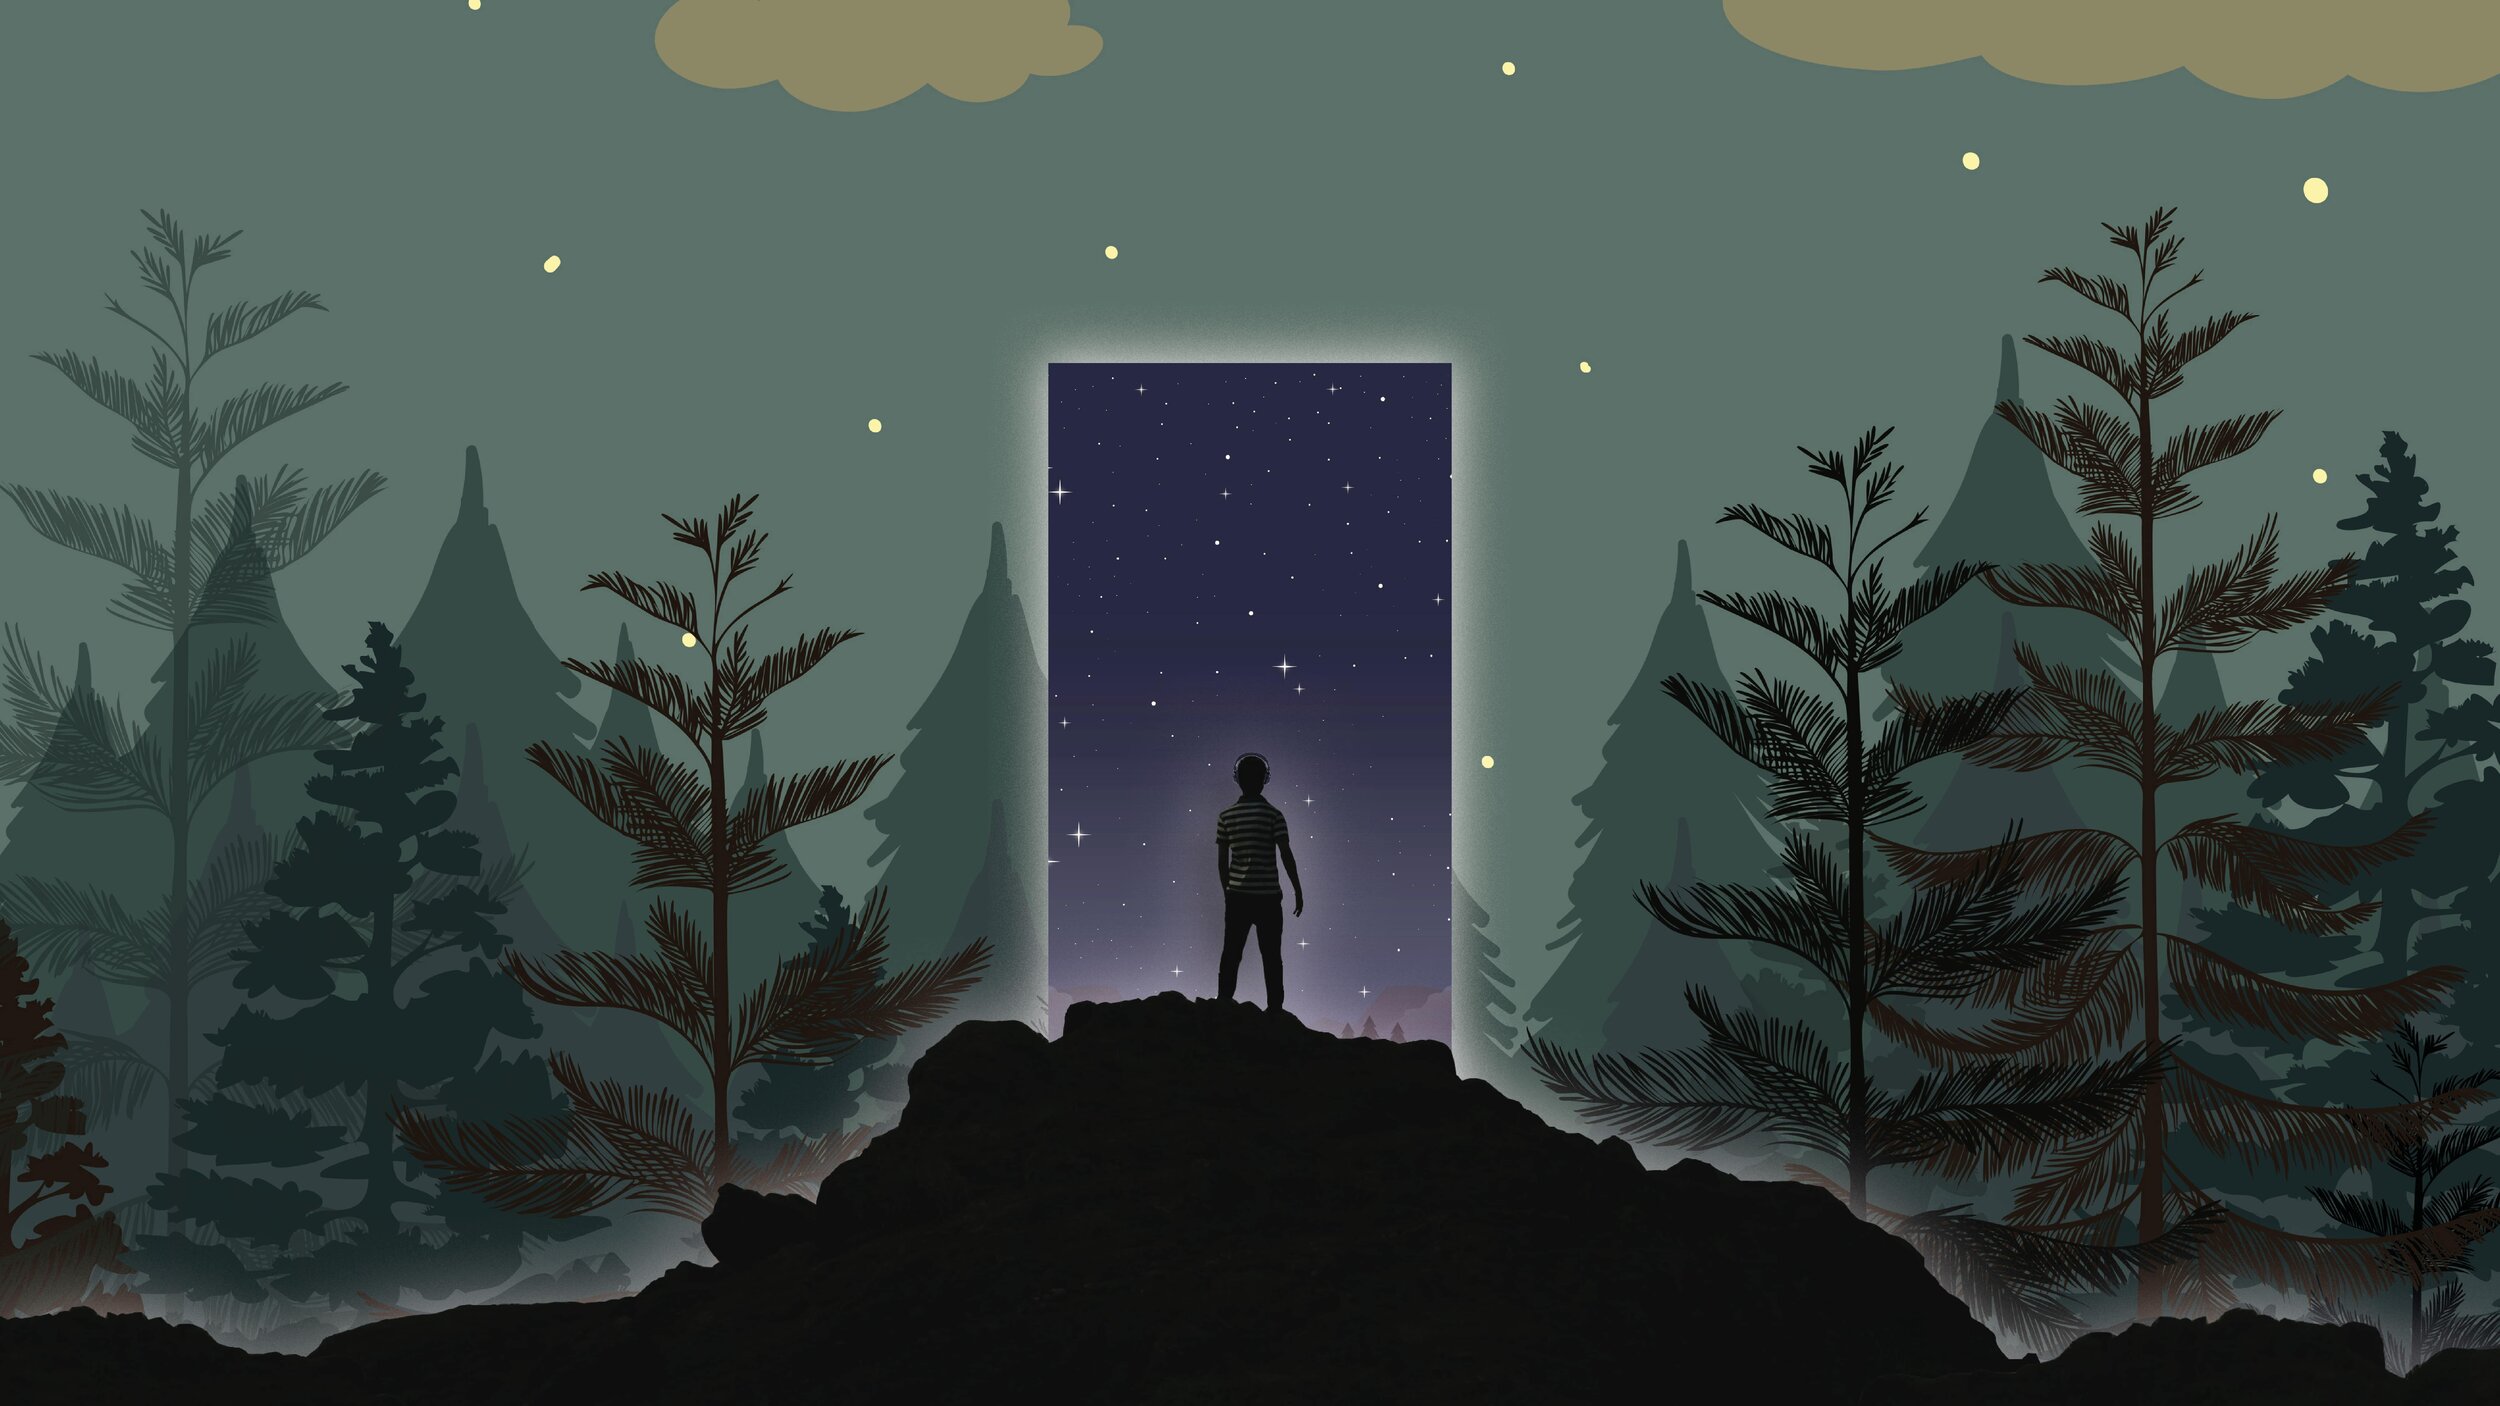 The back of a young person wearing headphones stands upon a rock. The horizon is a beautiful forest. Before them is a rectangular shape - the monolith. Within that we see the forest at night.